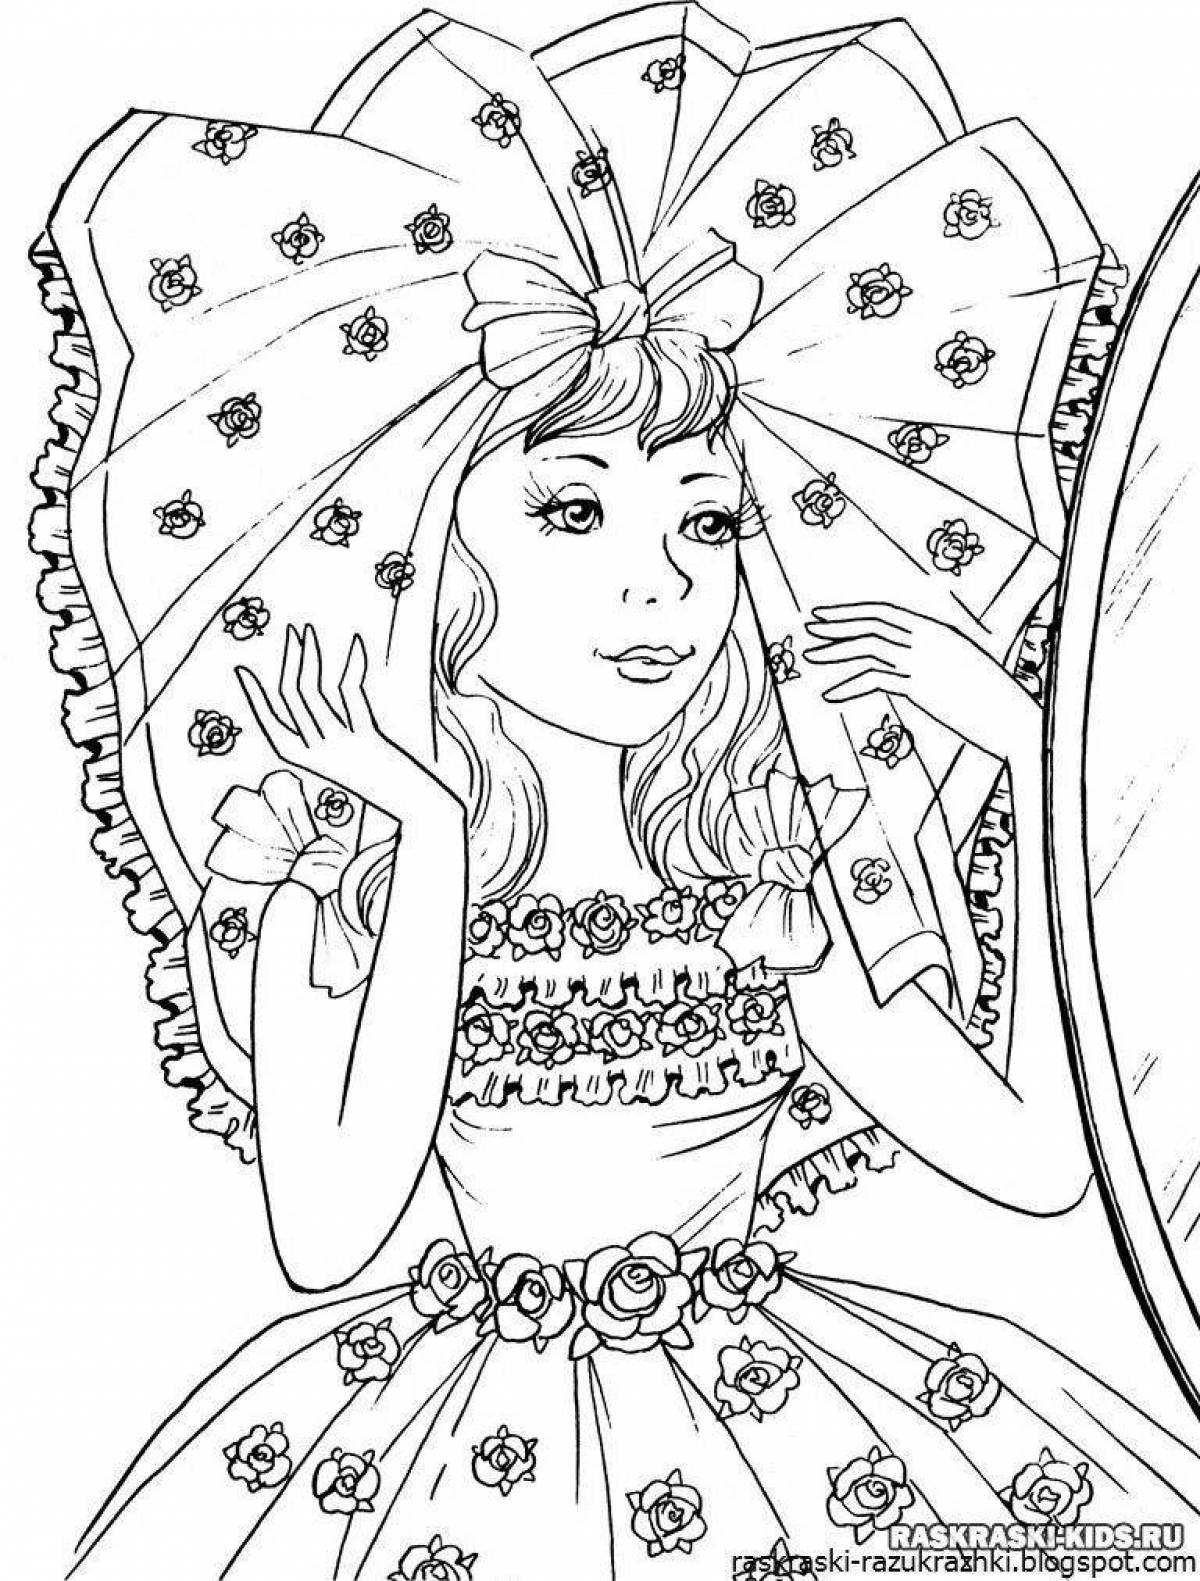 Playful coloring page 9 10 years old